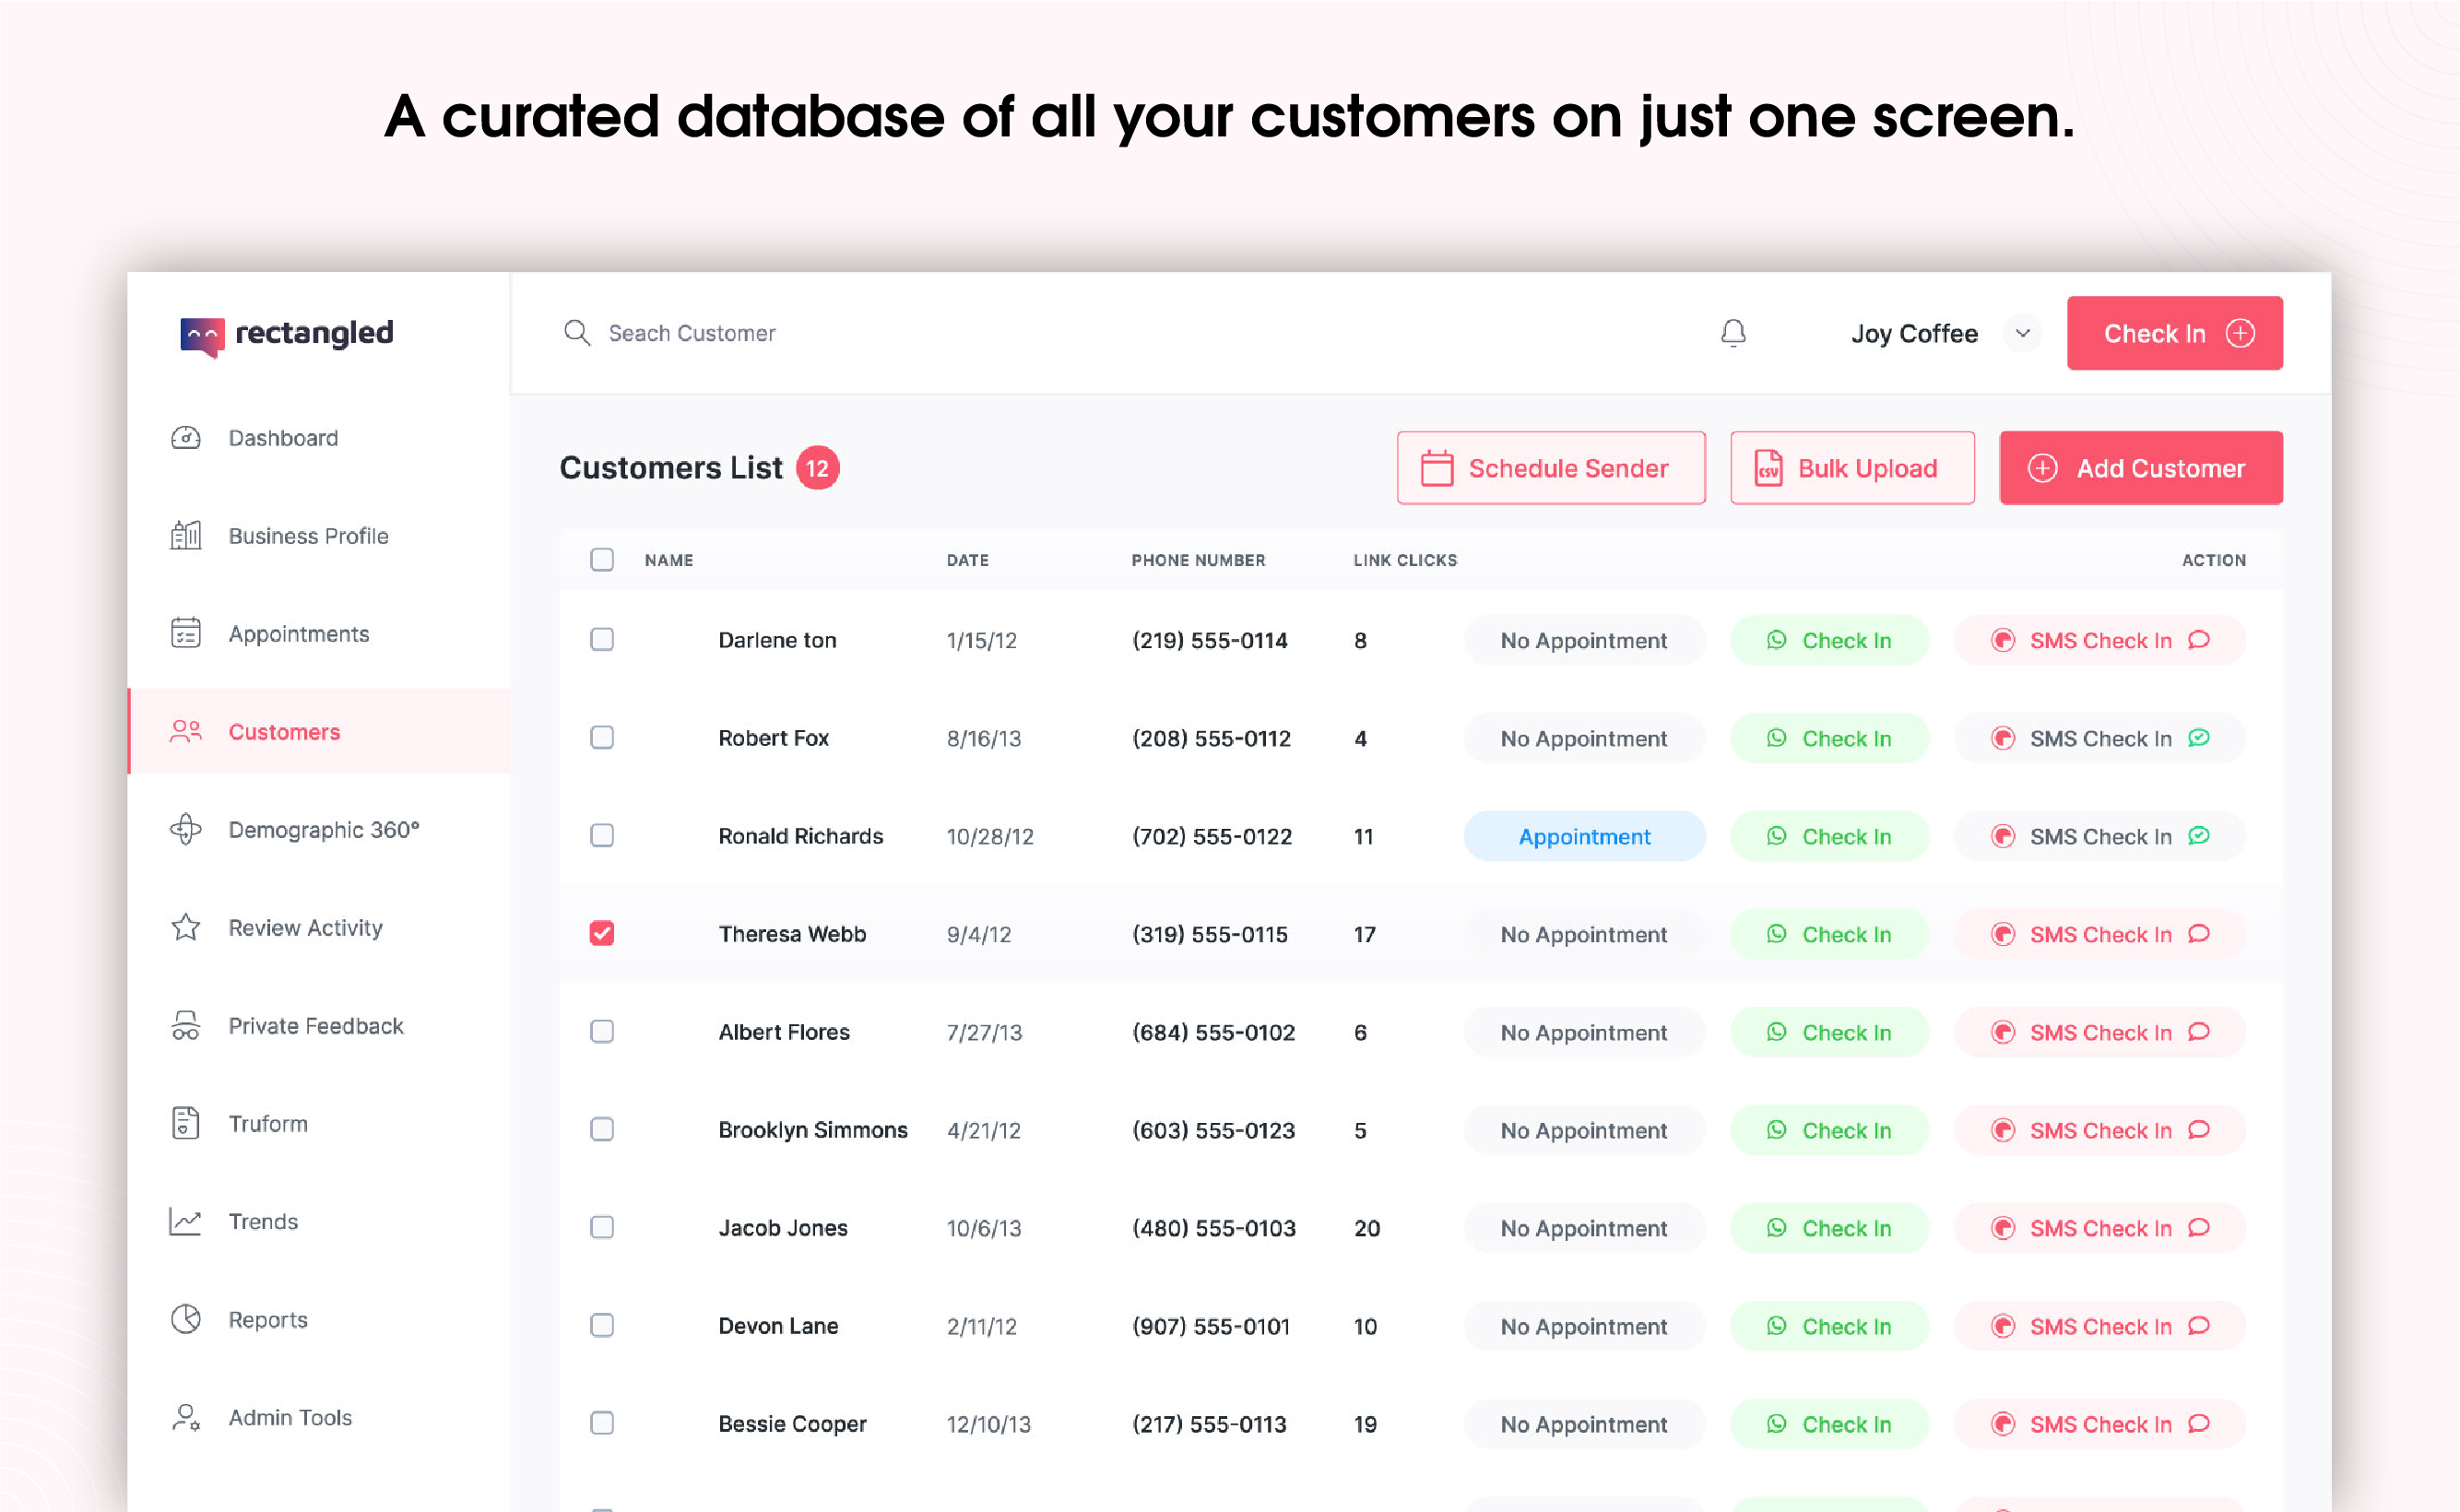 Curated customer database